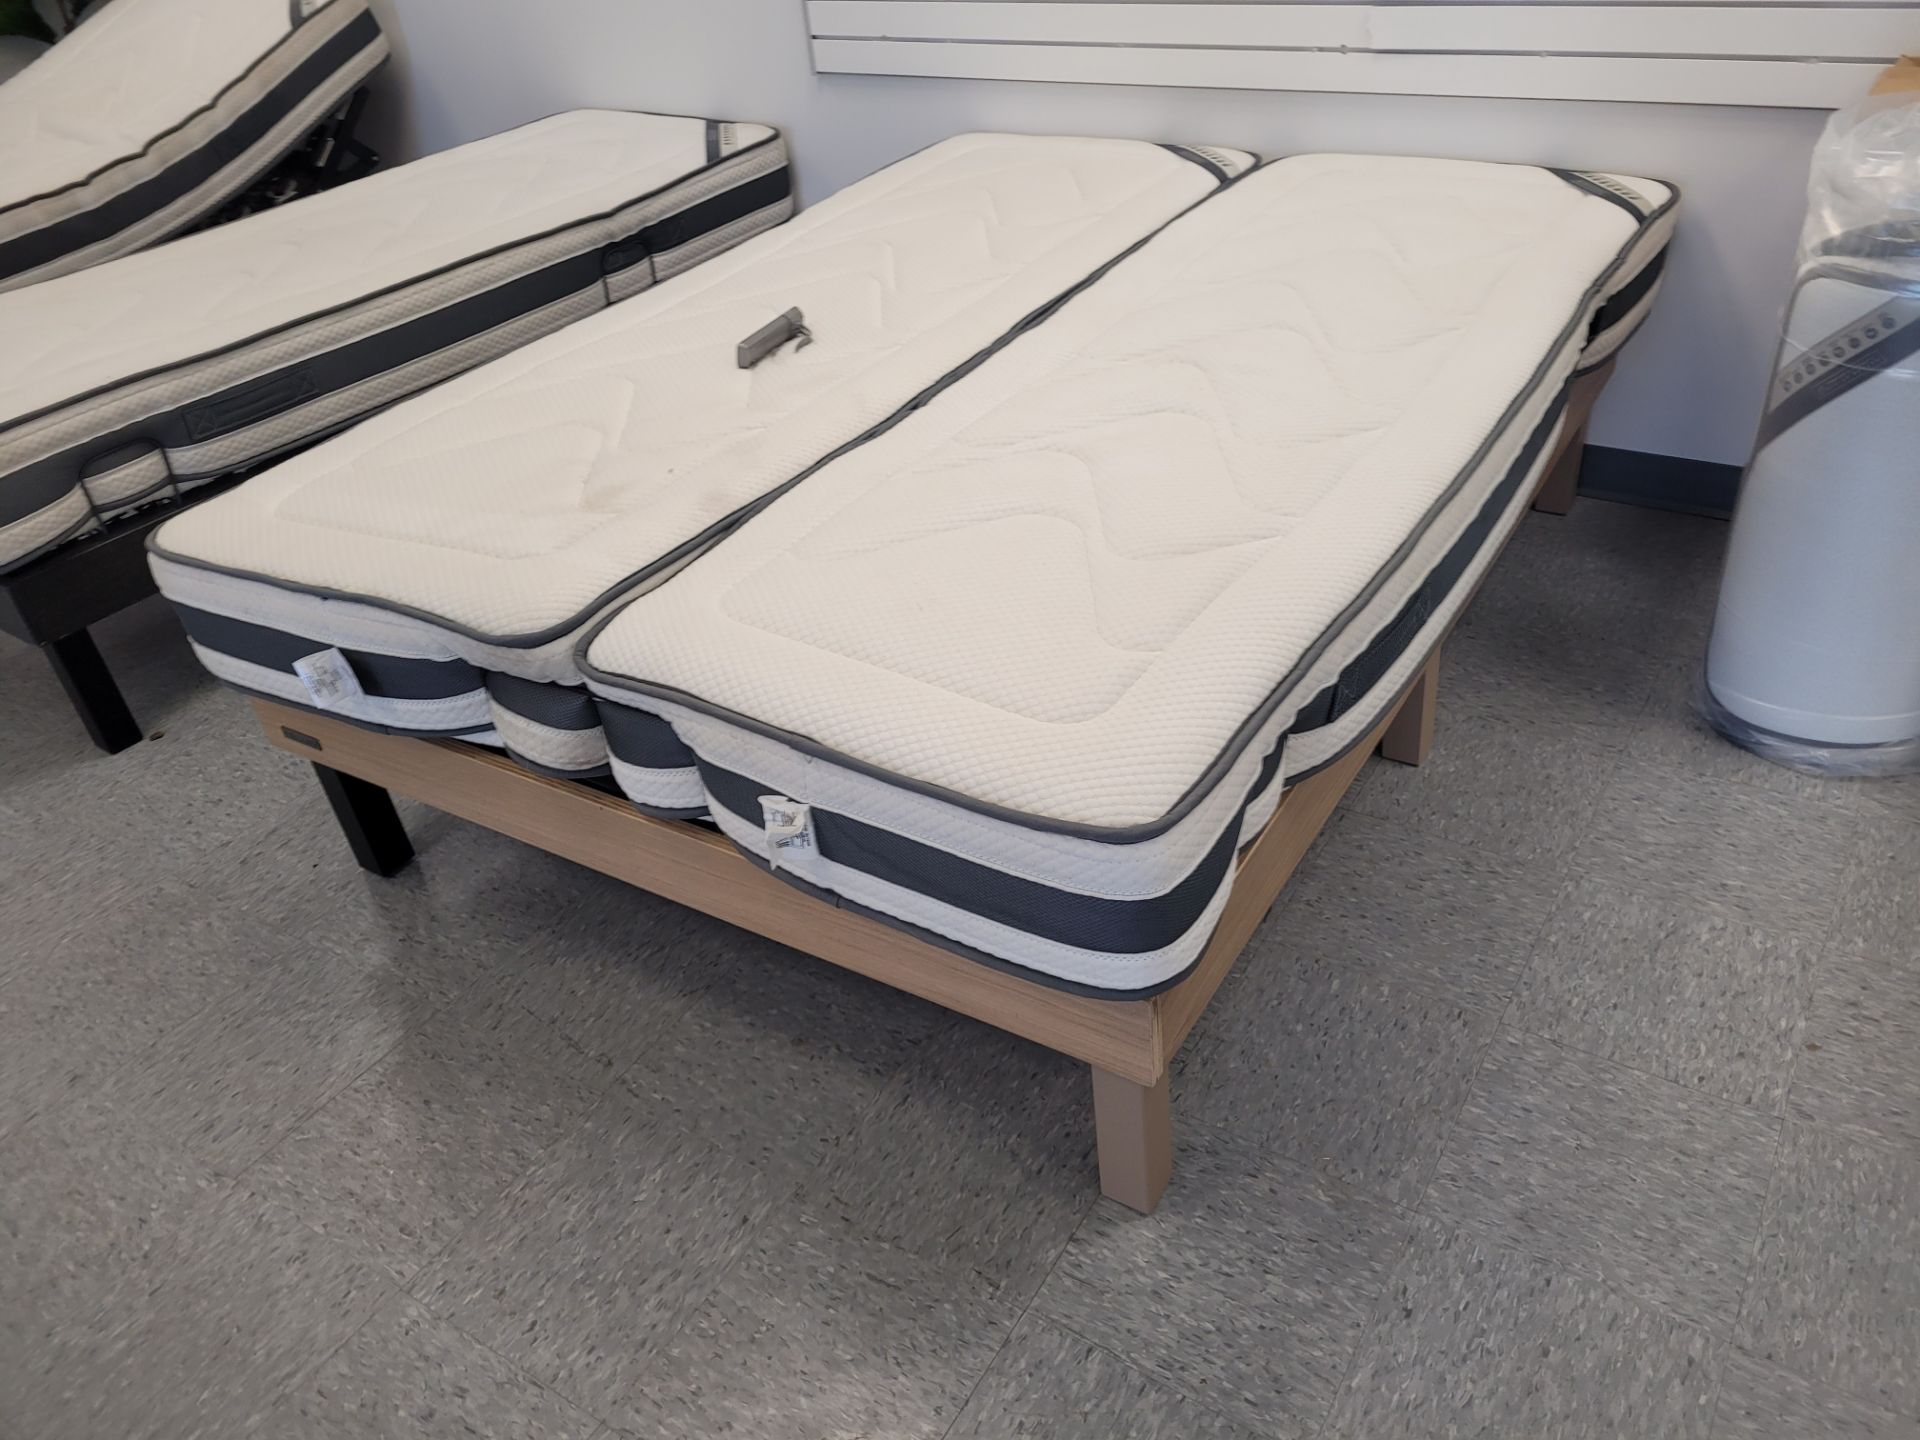 NATURE & PUR Memory Foam Mattress mod. ROYAL LUXE V2, size: 1/2 Queen, 30" x 79.5", hypoallergenic, - Image 4 of 7